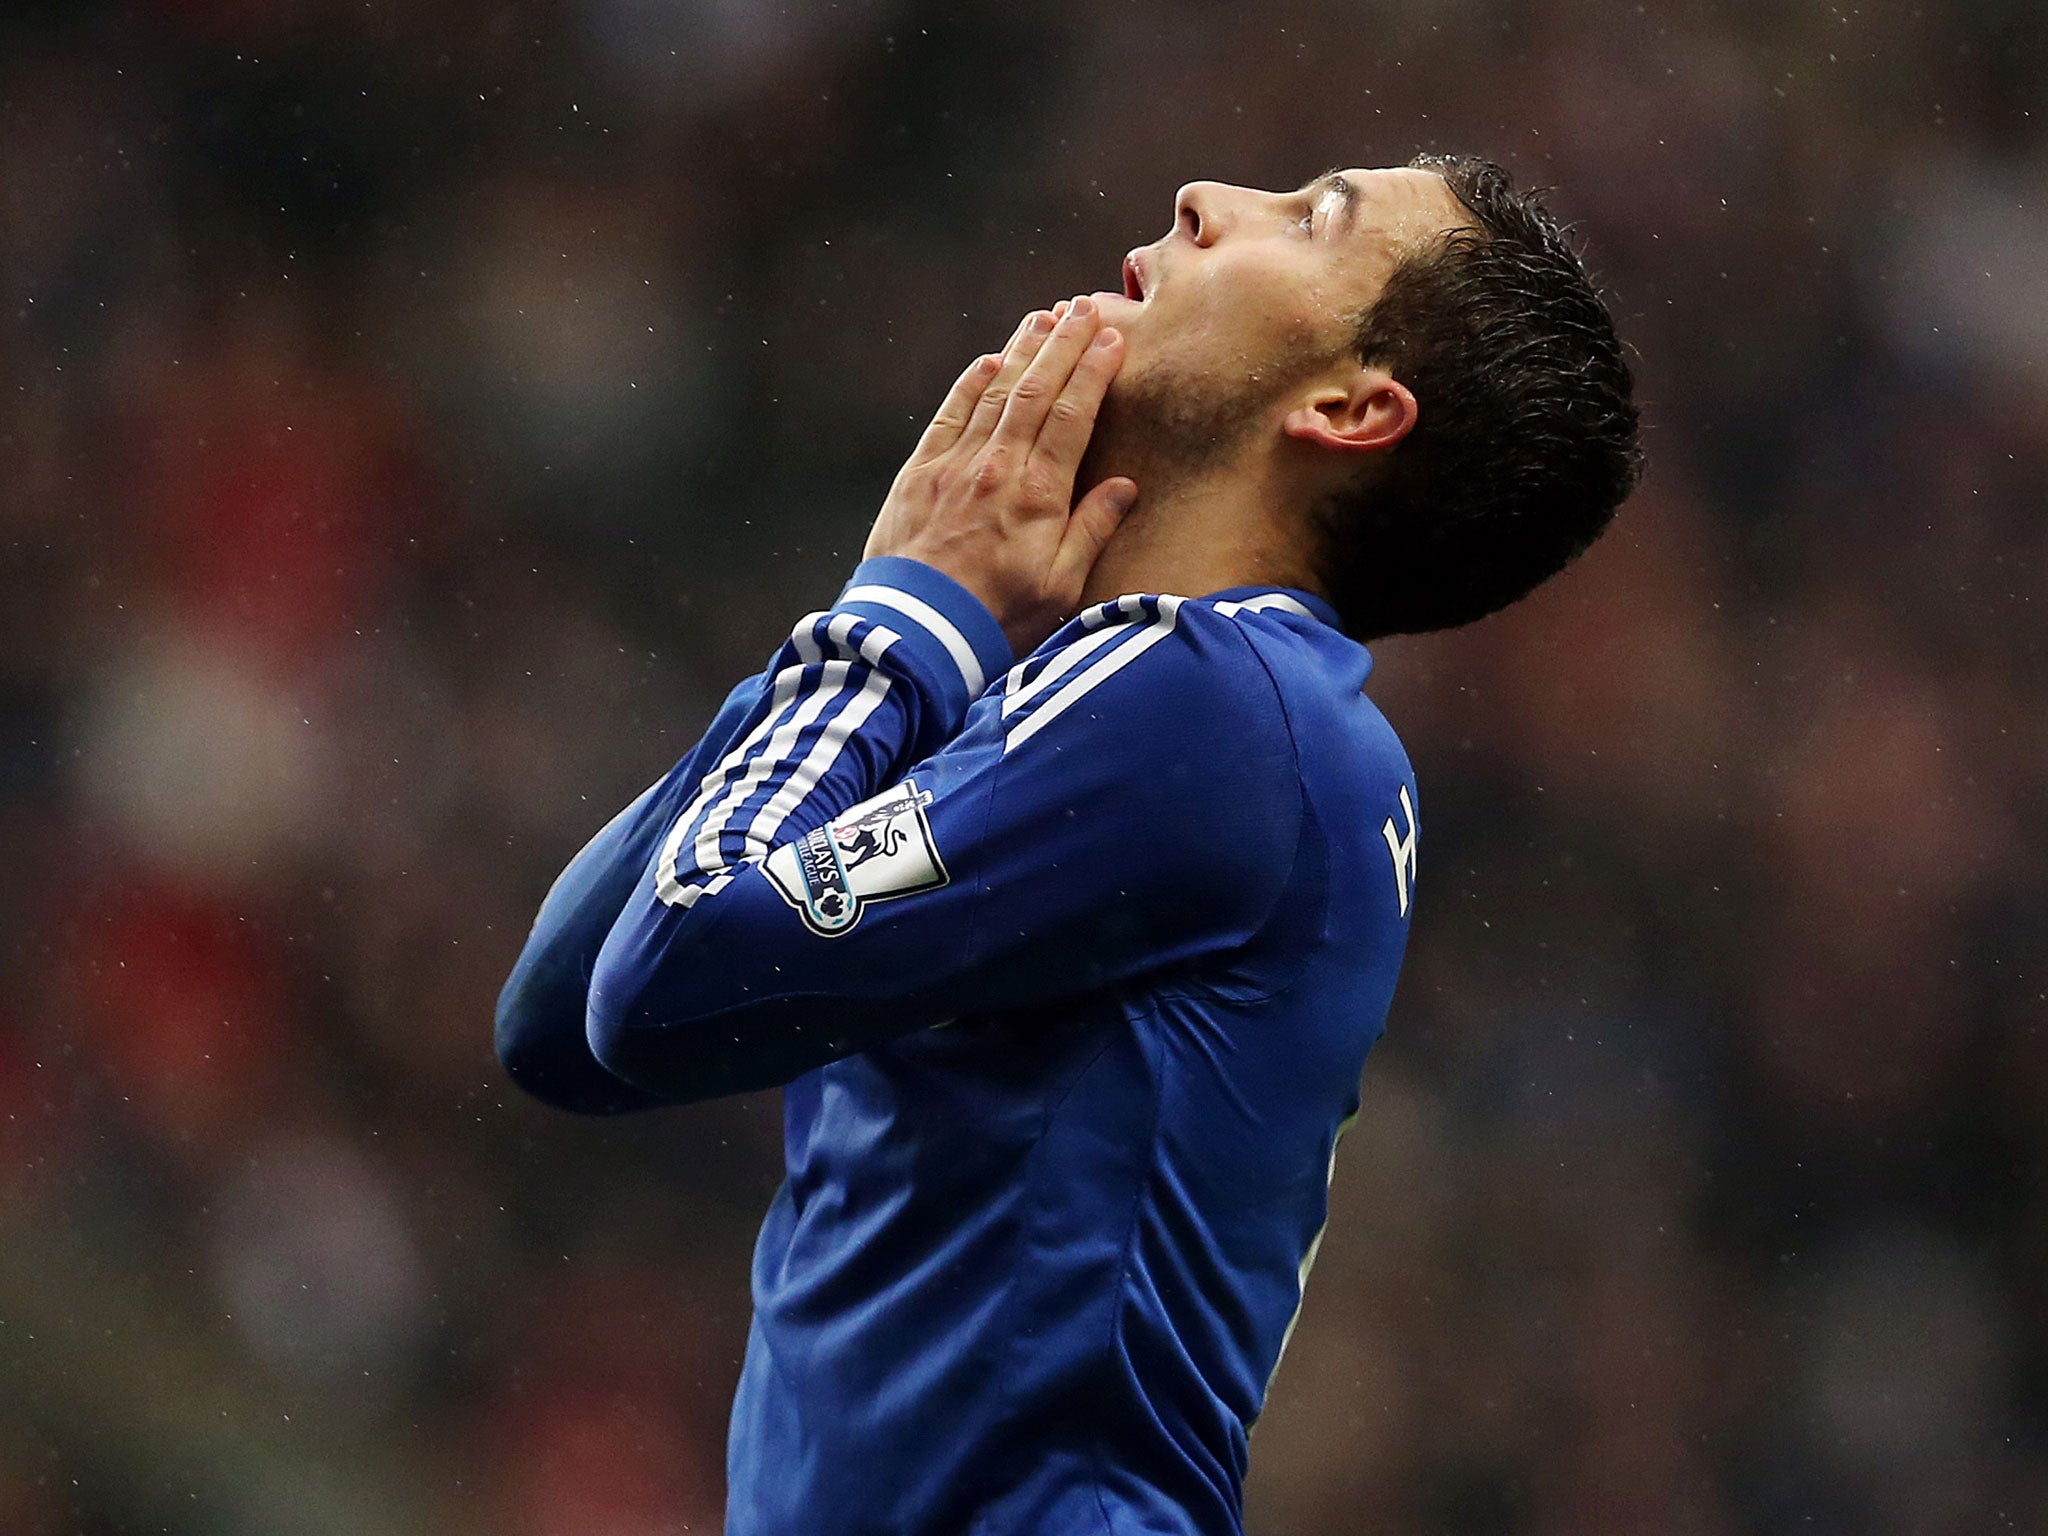 Chelsea midfielder Eden Hazard was dropped for the 3-0 Champions League victory over Schalke due to disciplinary reasons